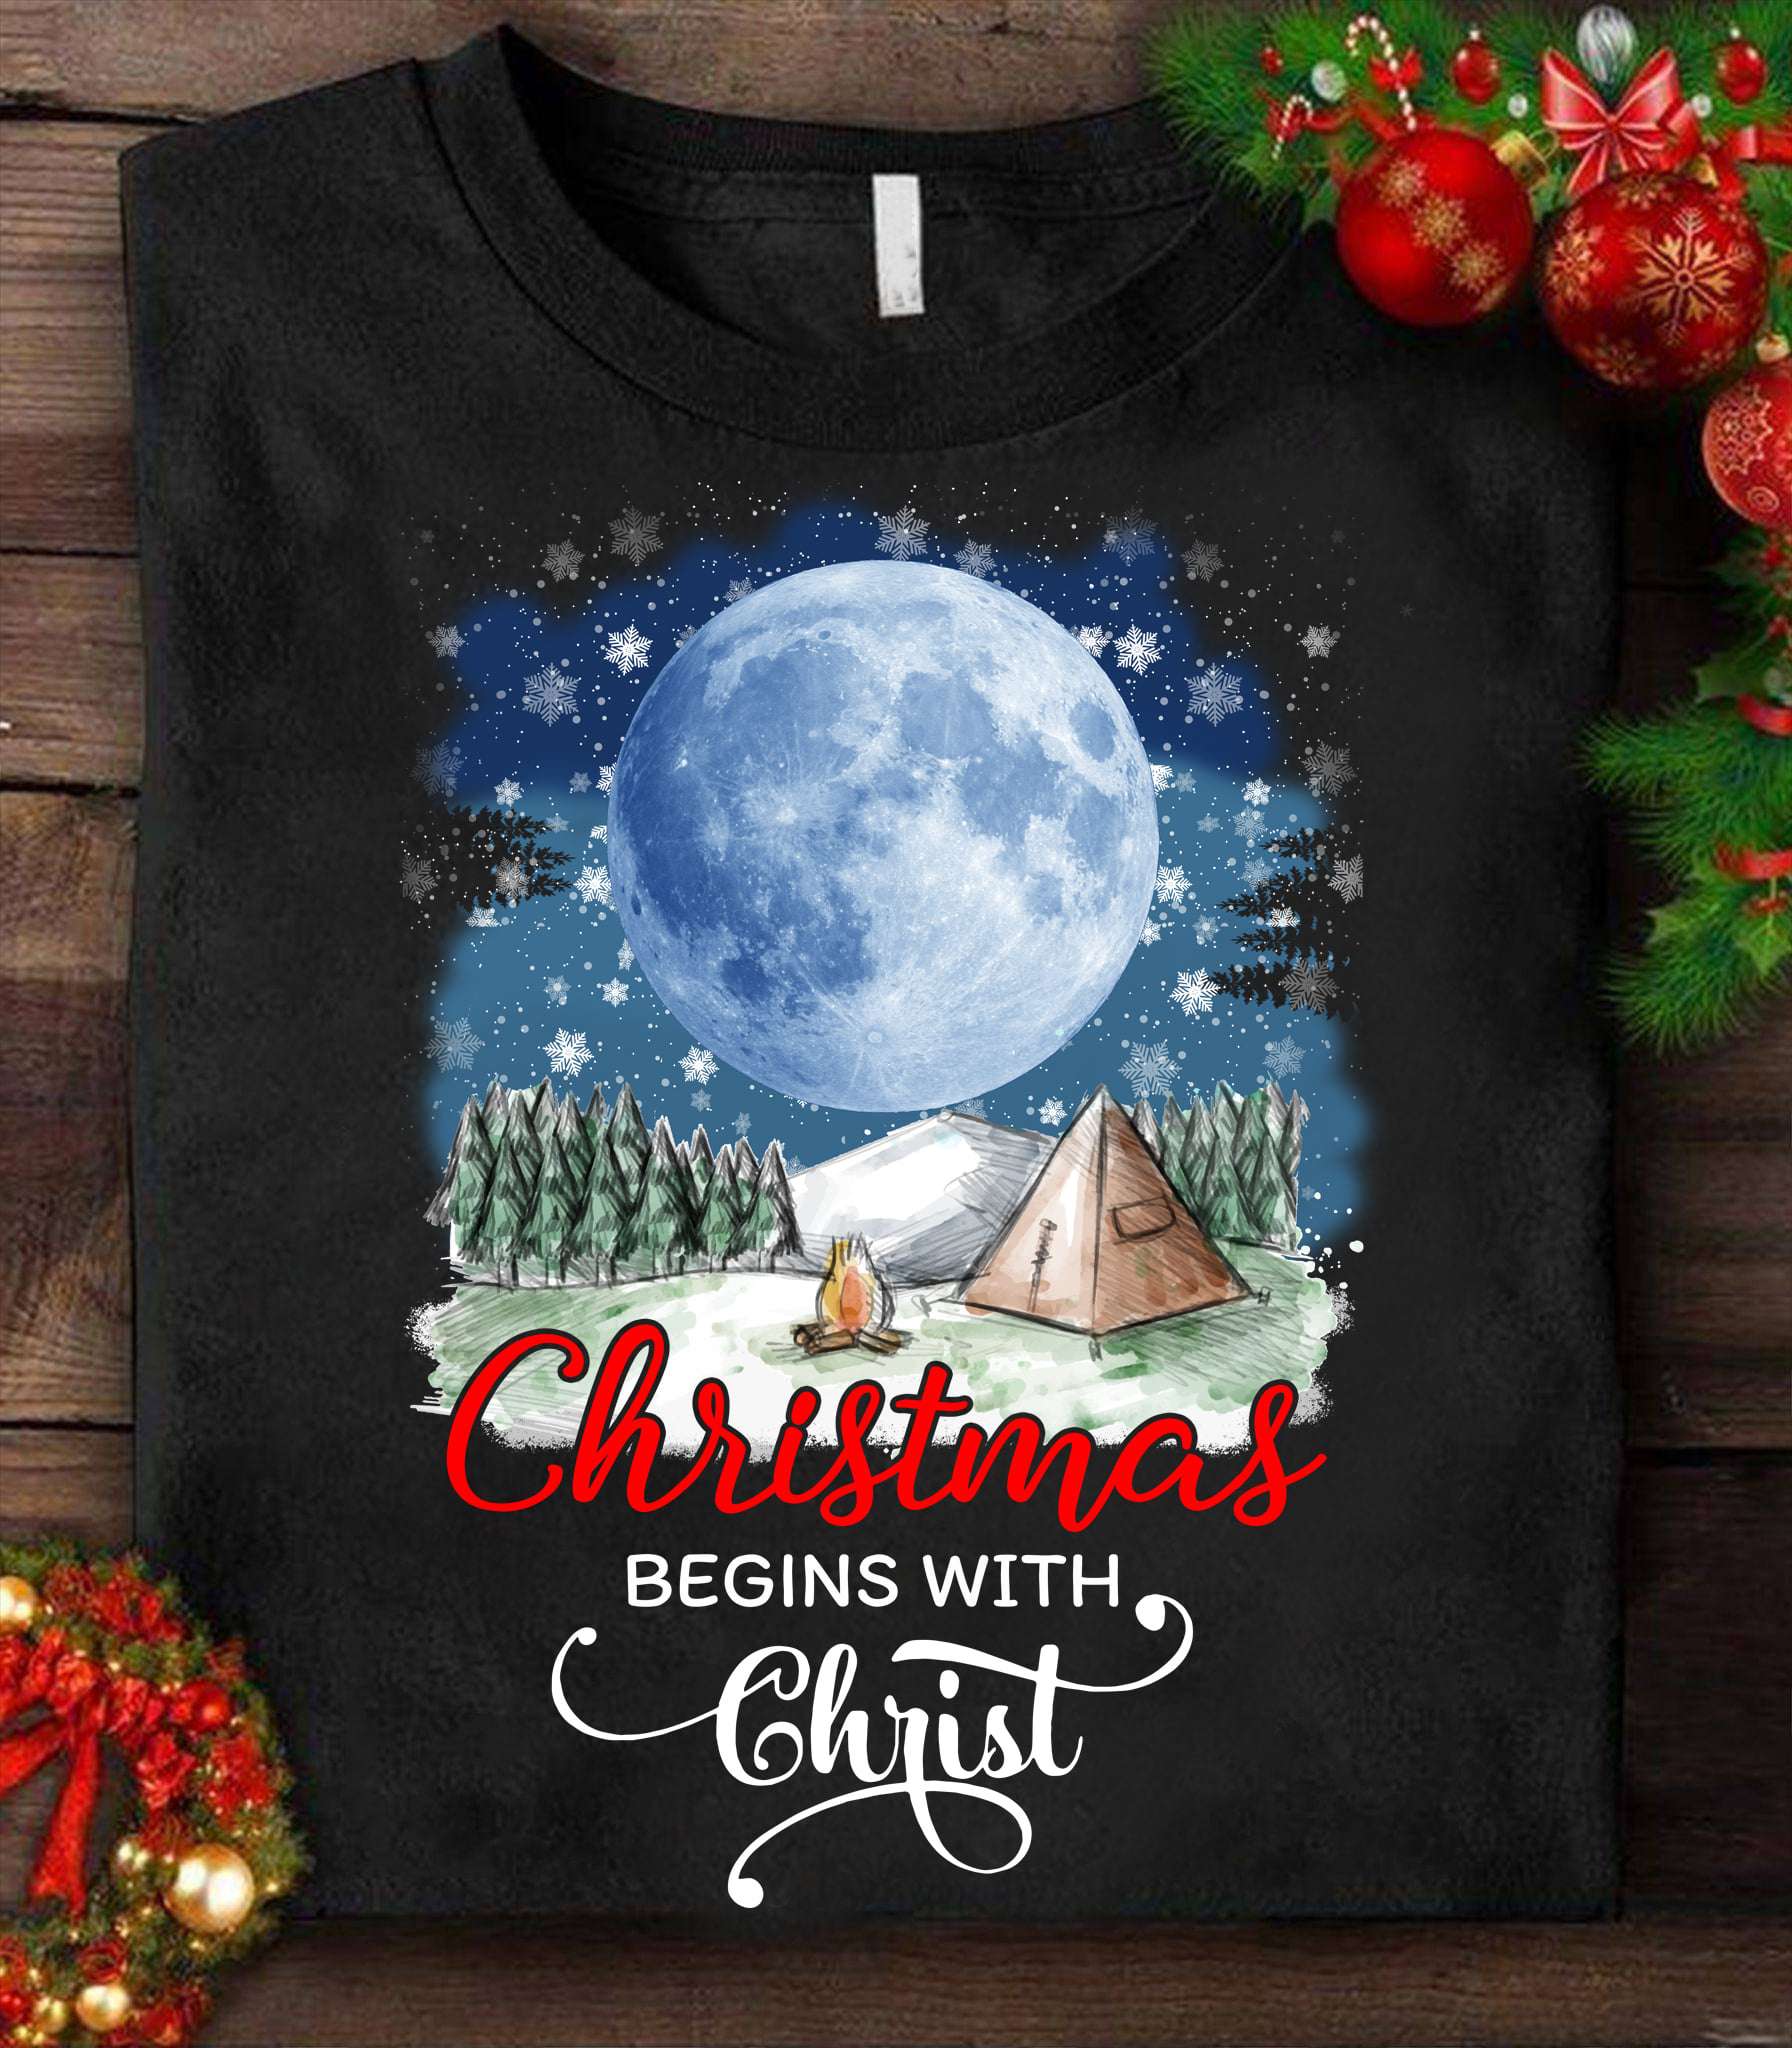 Christmas begin with Christ - Camping during winter, Christmas day ugly sweater